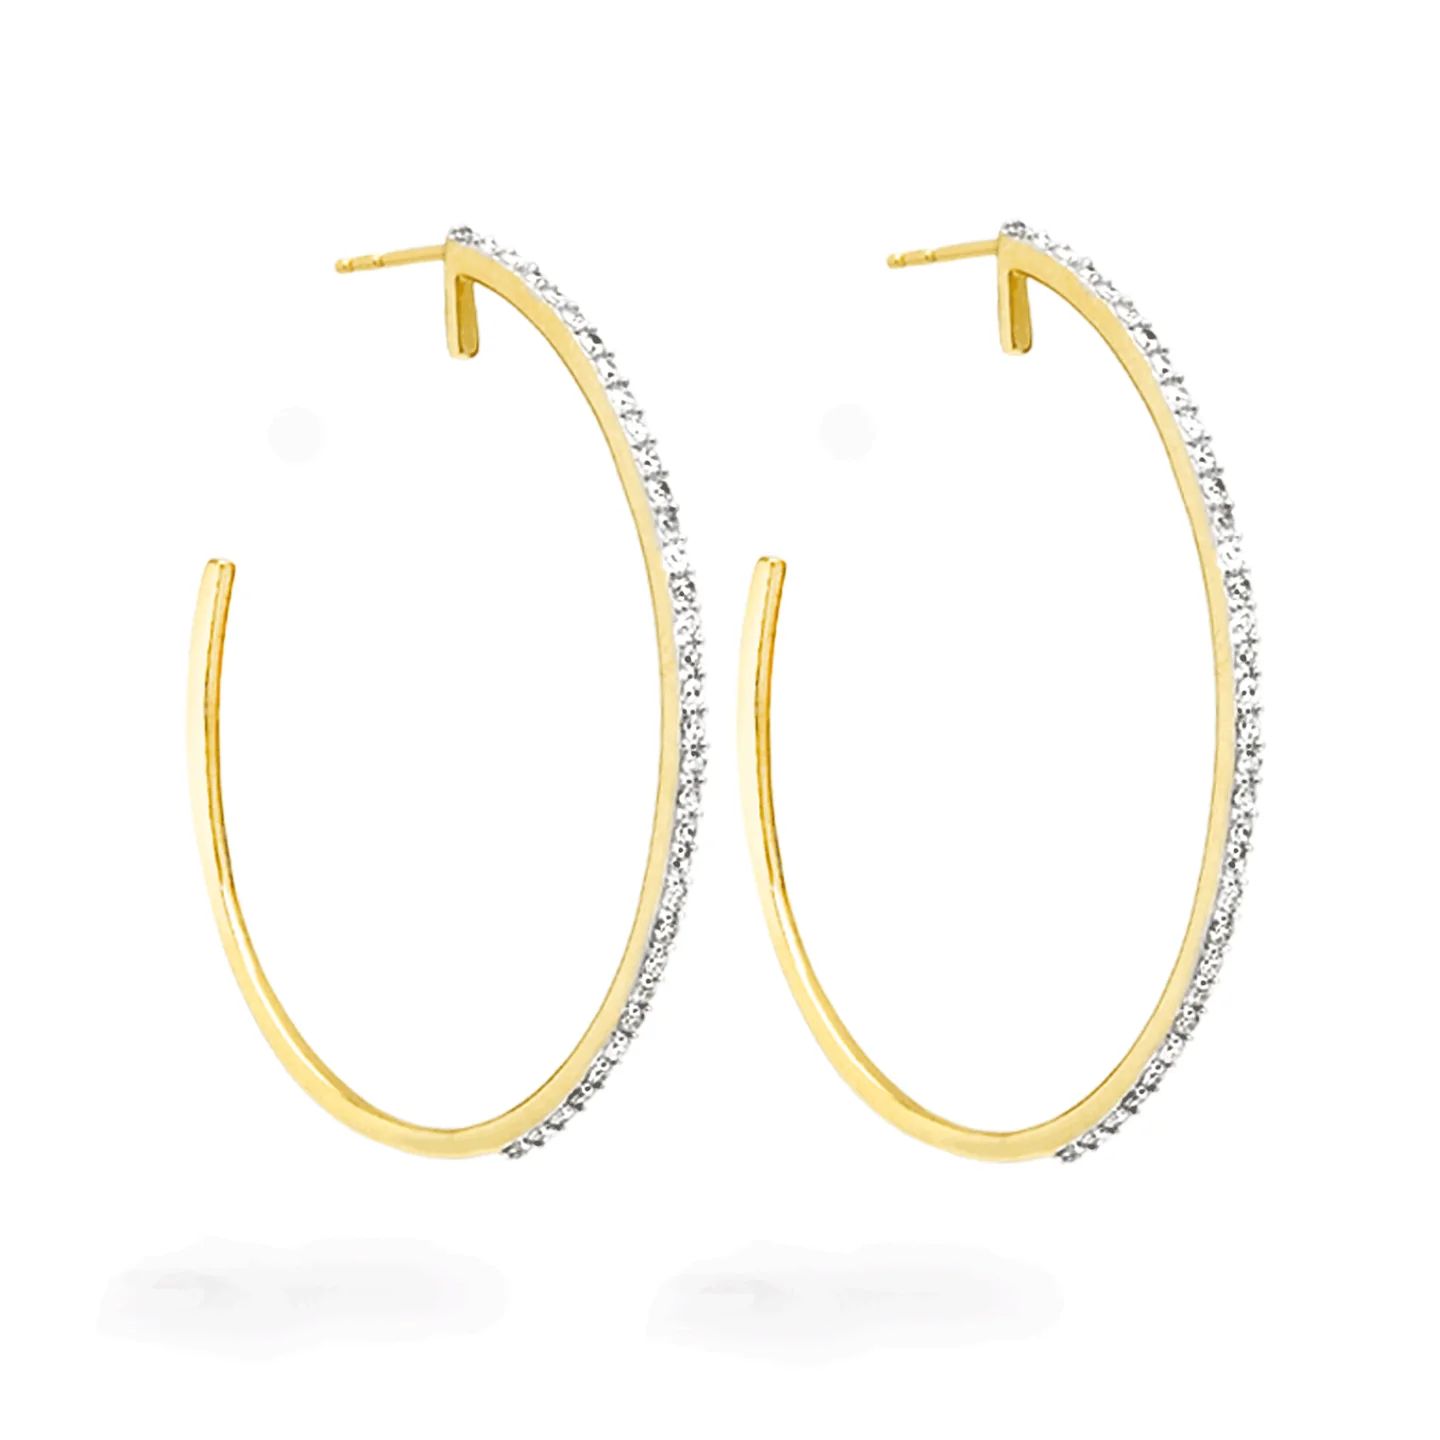 XL Pave Oval Hoop Earrings | Stone & Strand